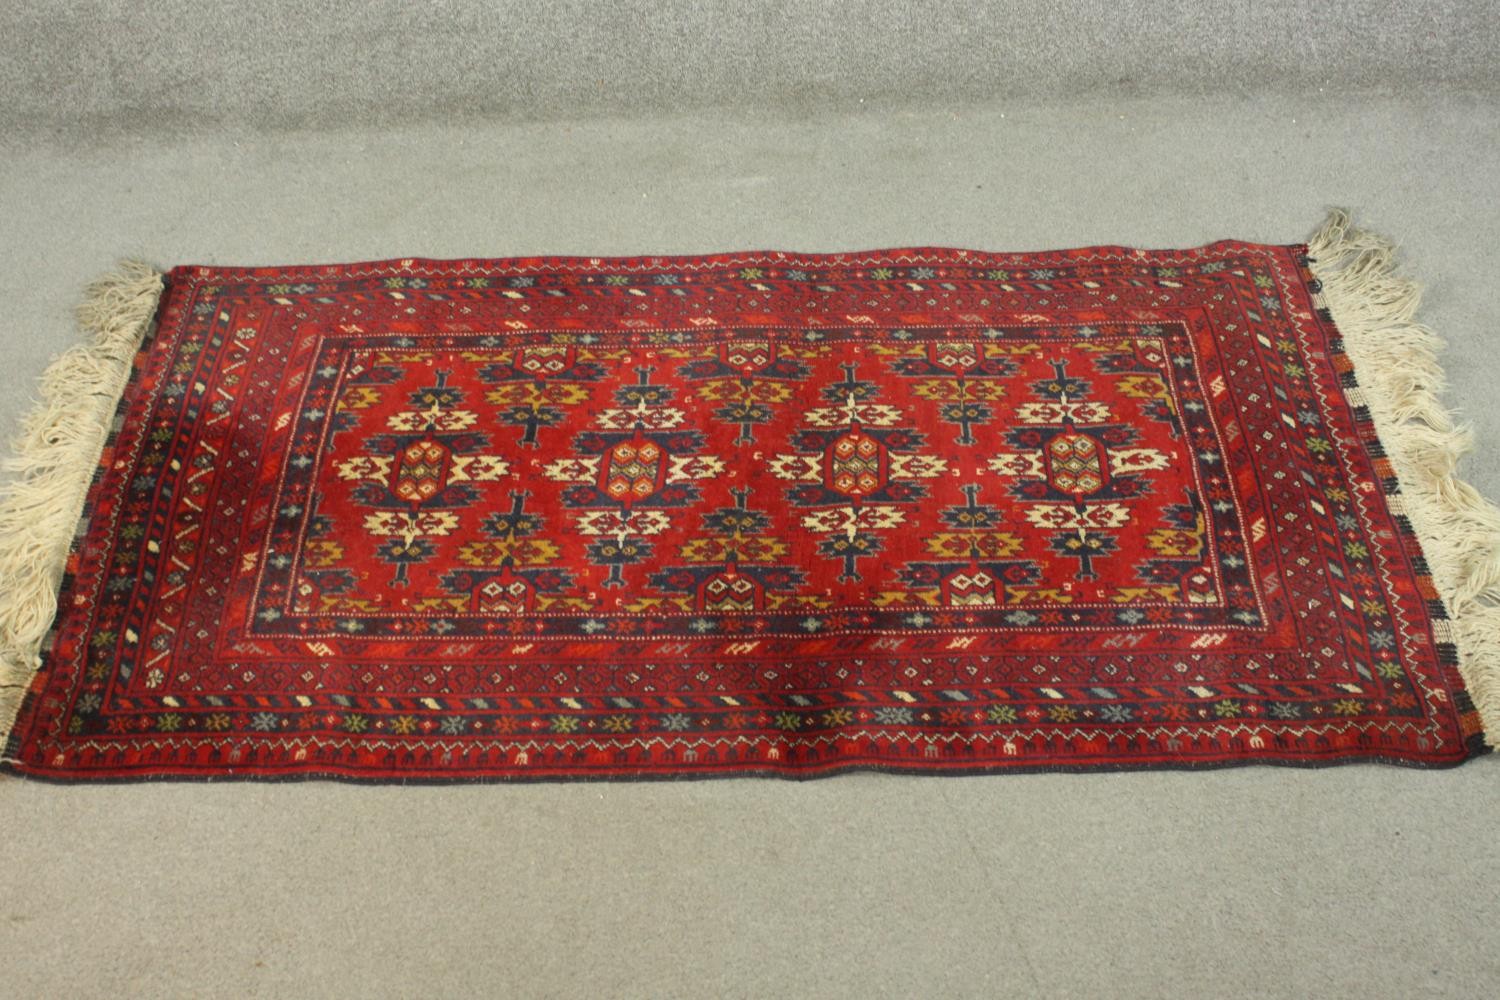 A hand made red ground Ankhoi Afghan rug. L.150 W.87cm.